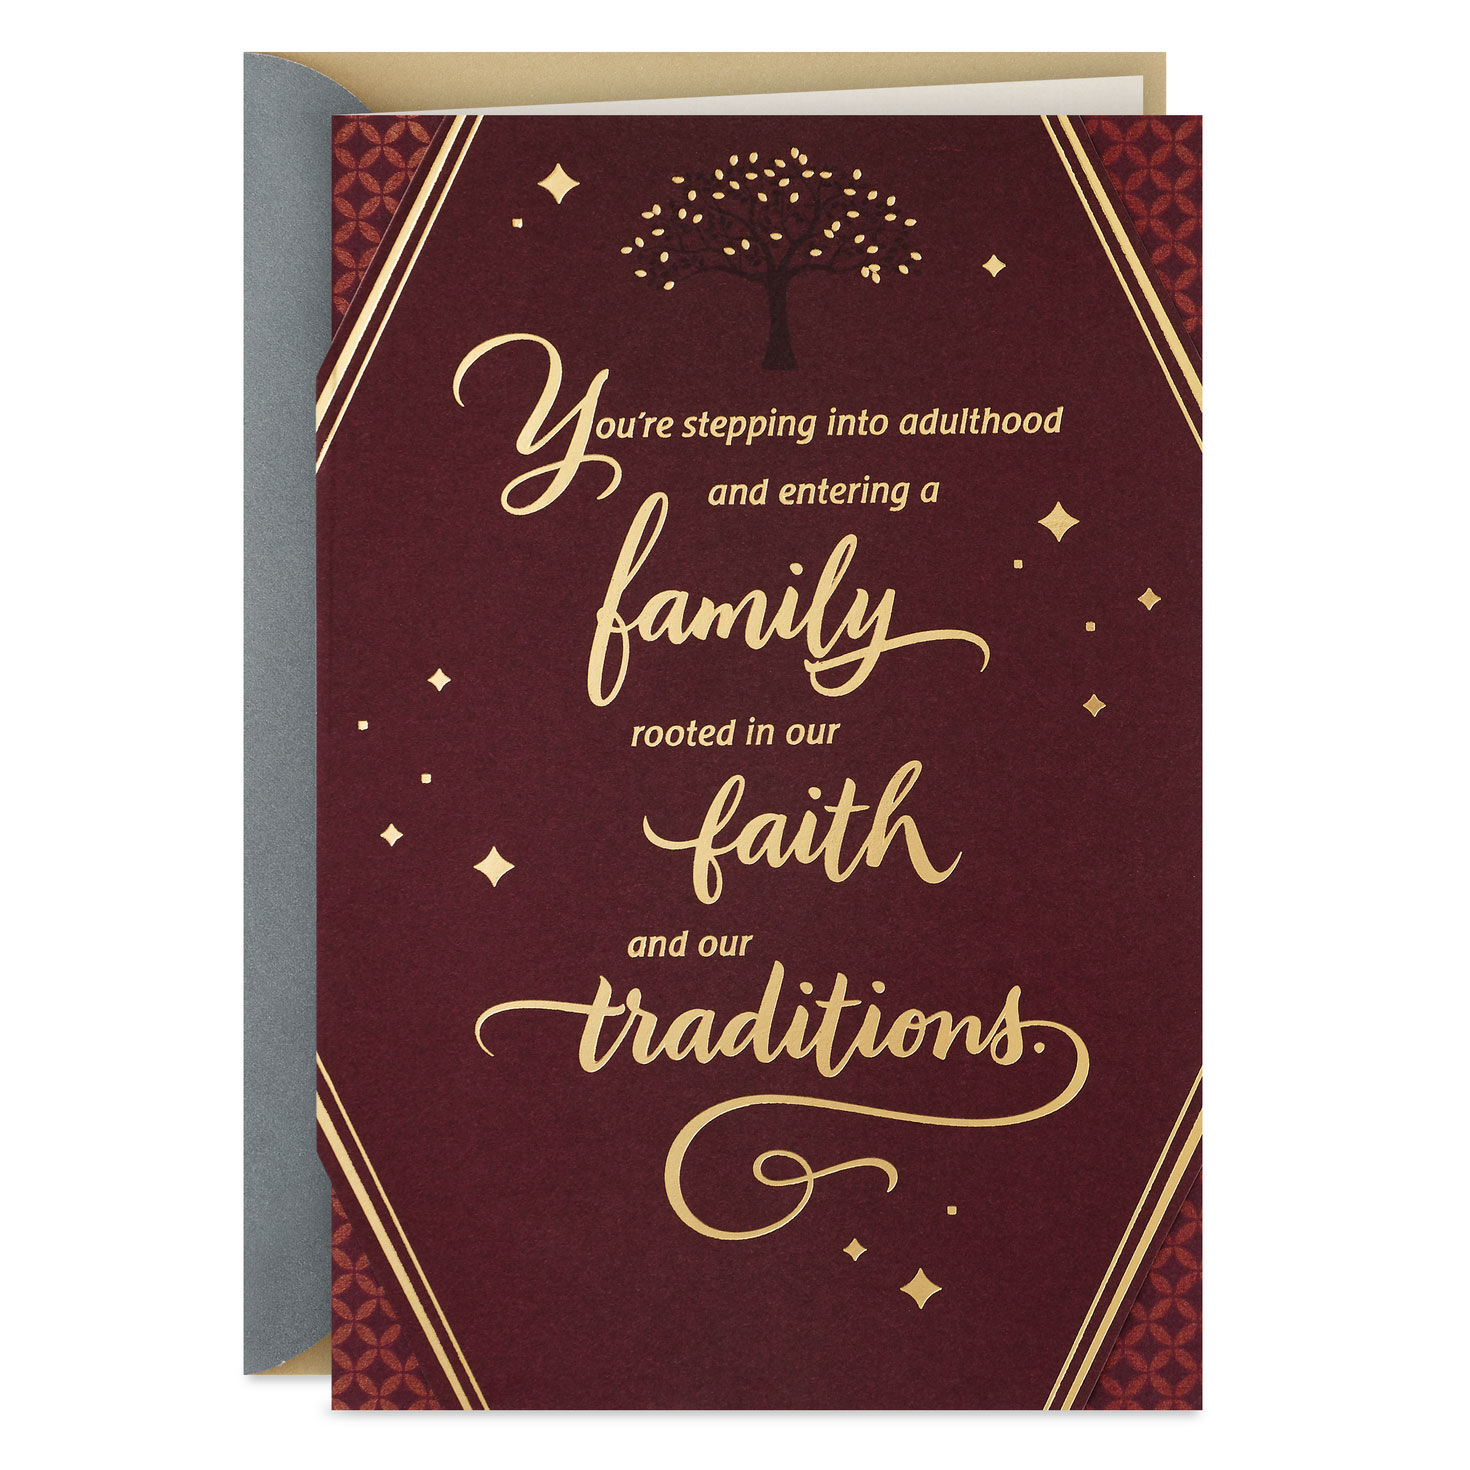 Rooted in Our Faith and Traditions Bar Mitzvah Card for only USD 3.59 | Hallmark